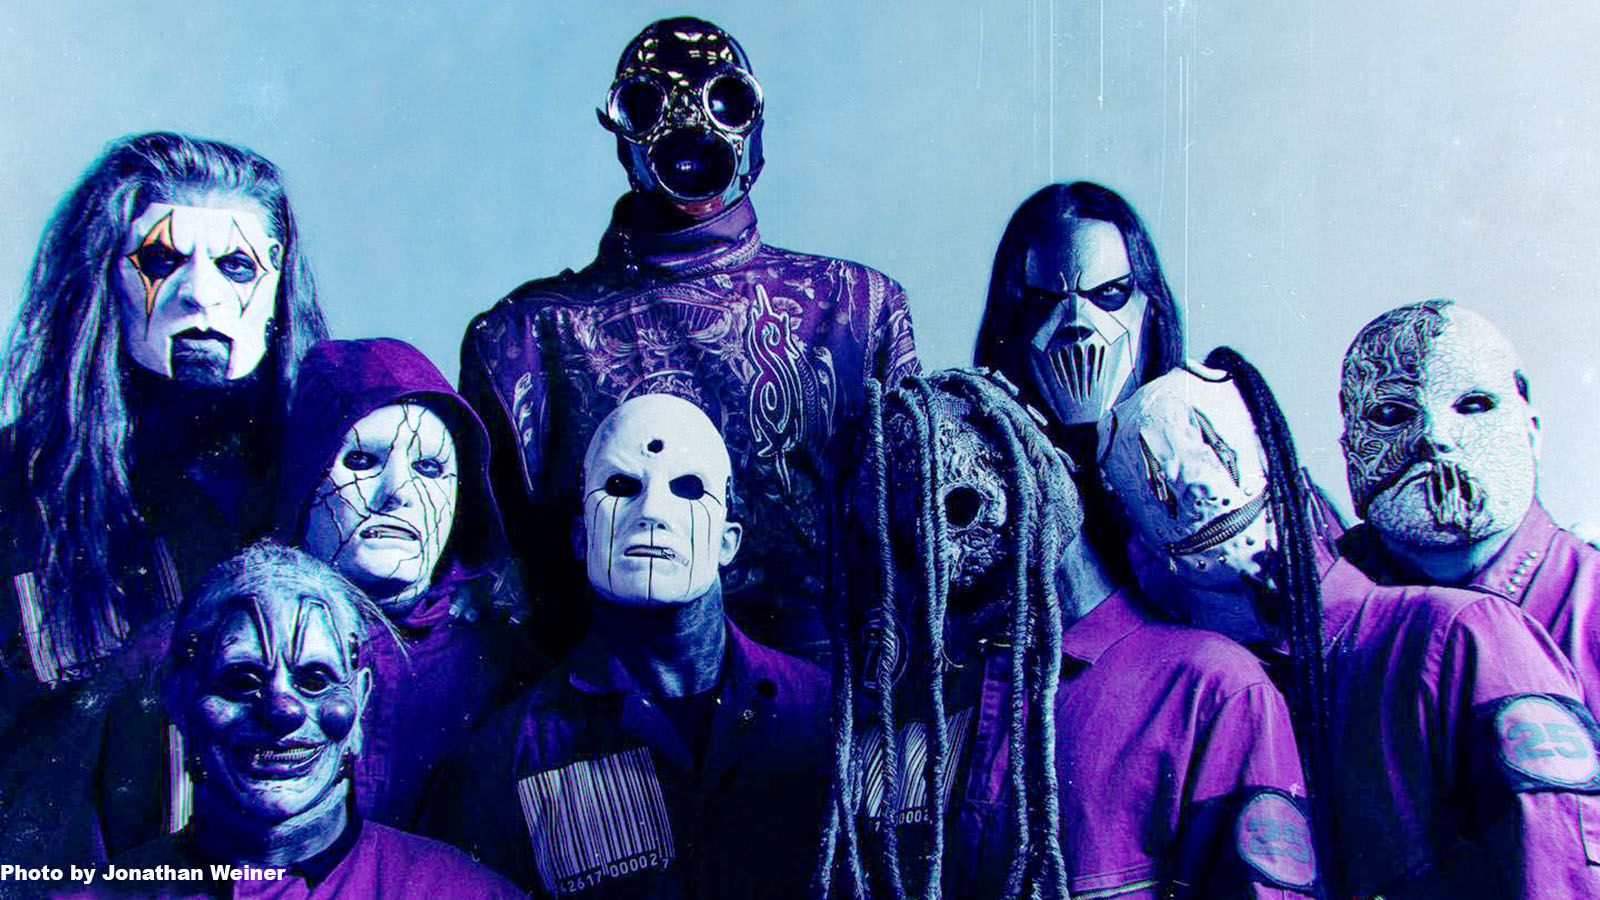 Slipknot will be at Ruoff Music Center this fall.